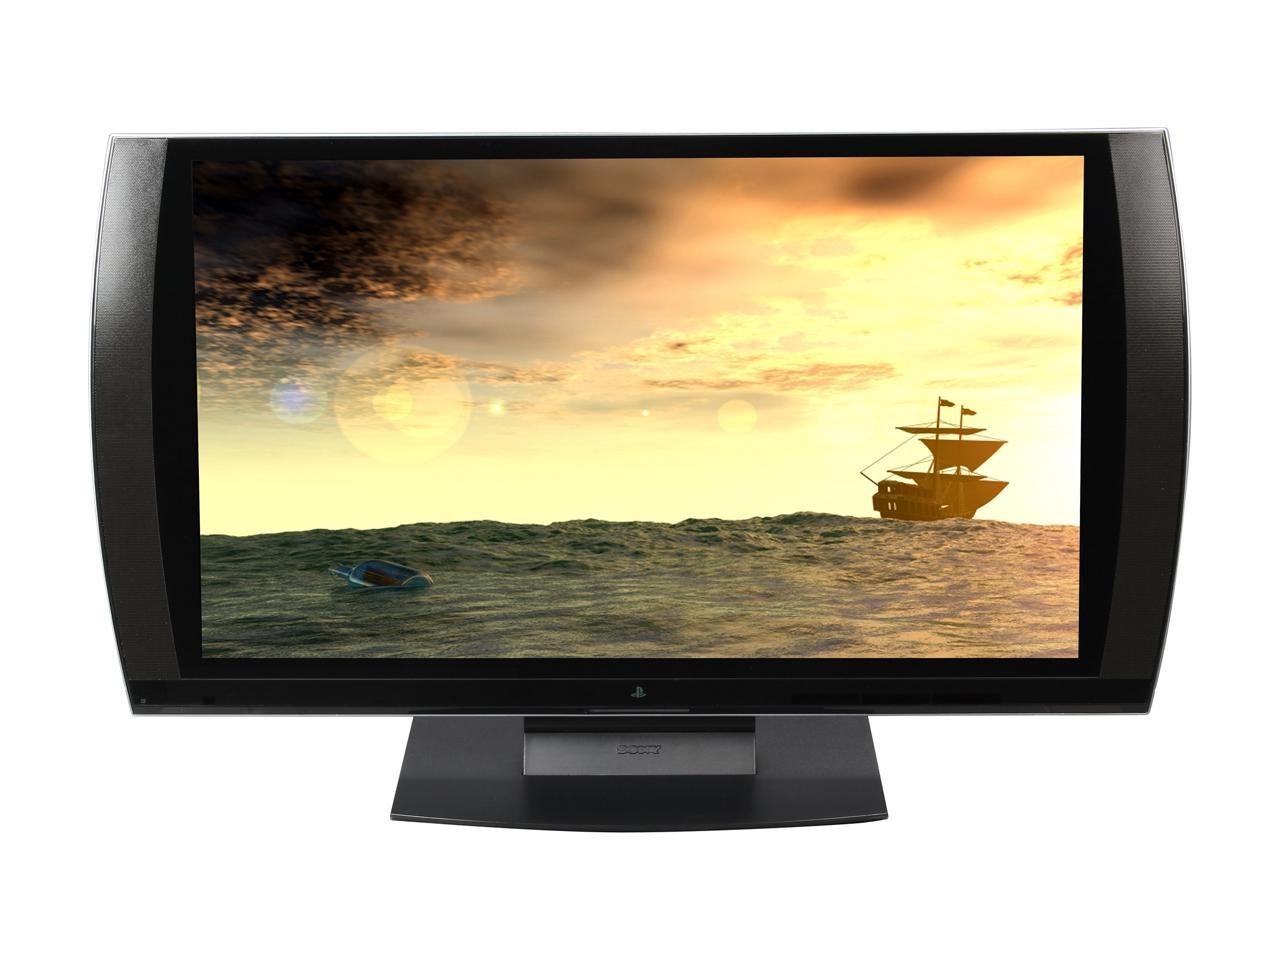 Sony Playstation 24 3d 1080p 240hz Widescreen Led Lcd 3 In 1 Monitor Newegg Ca